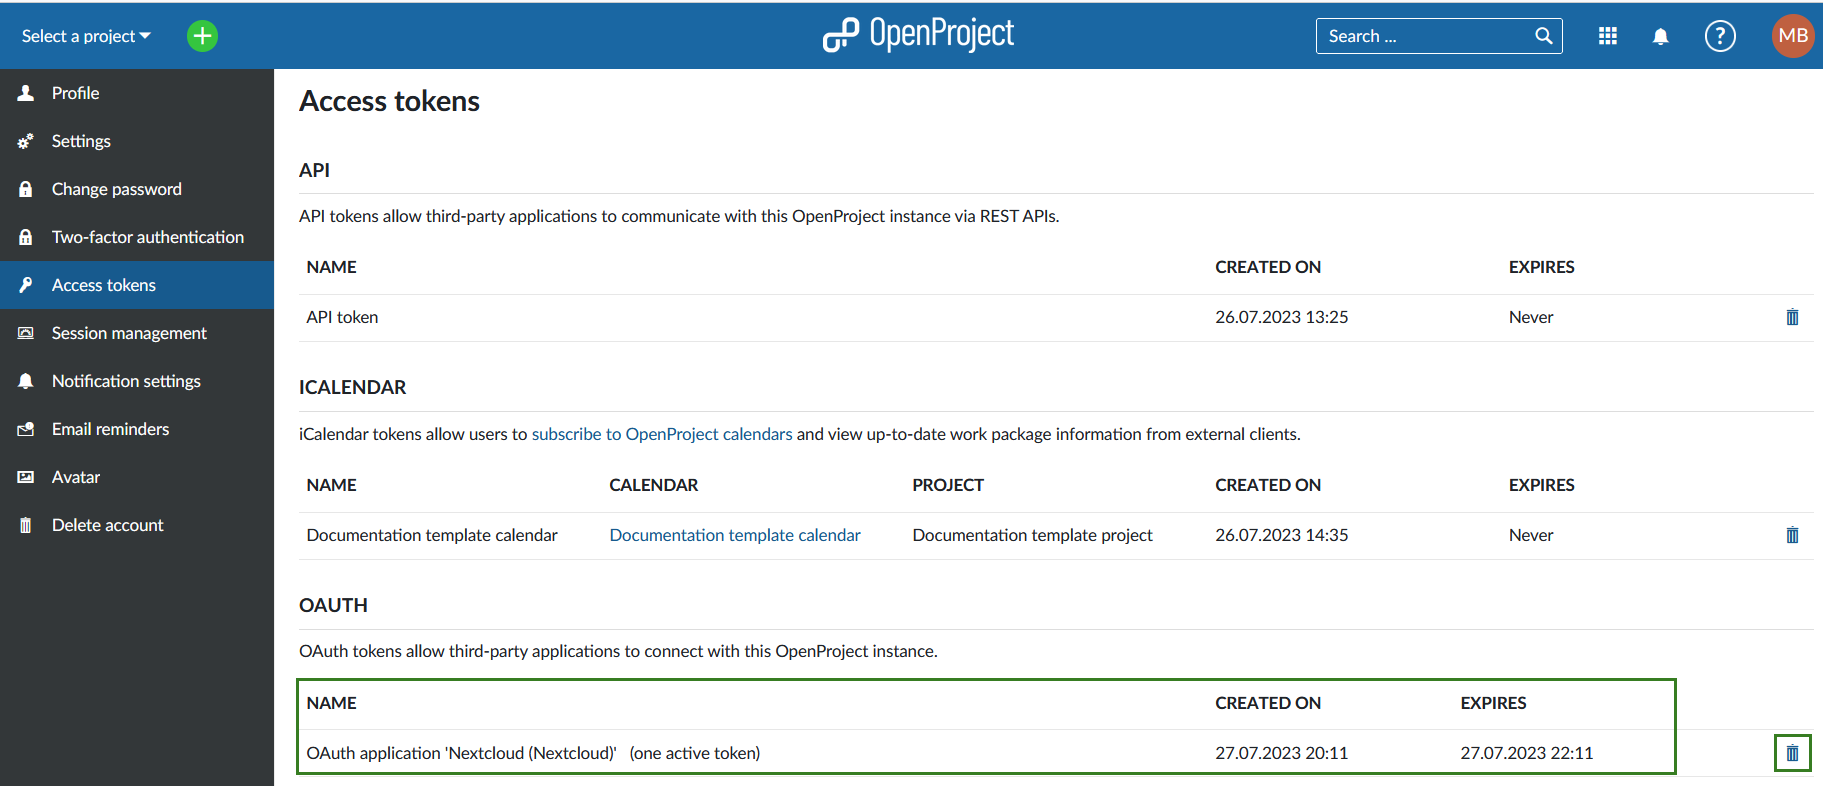 openproject_my_account_access_tokens_oauth.png